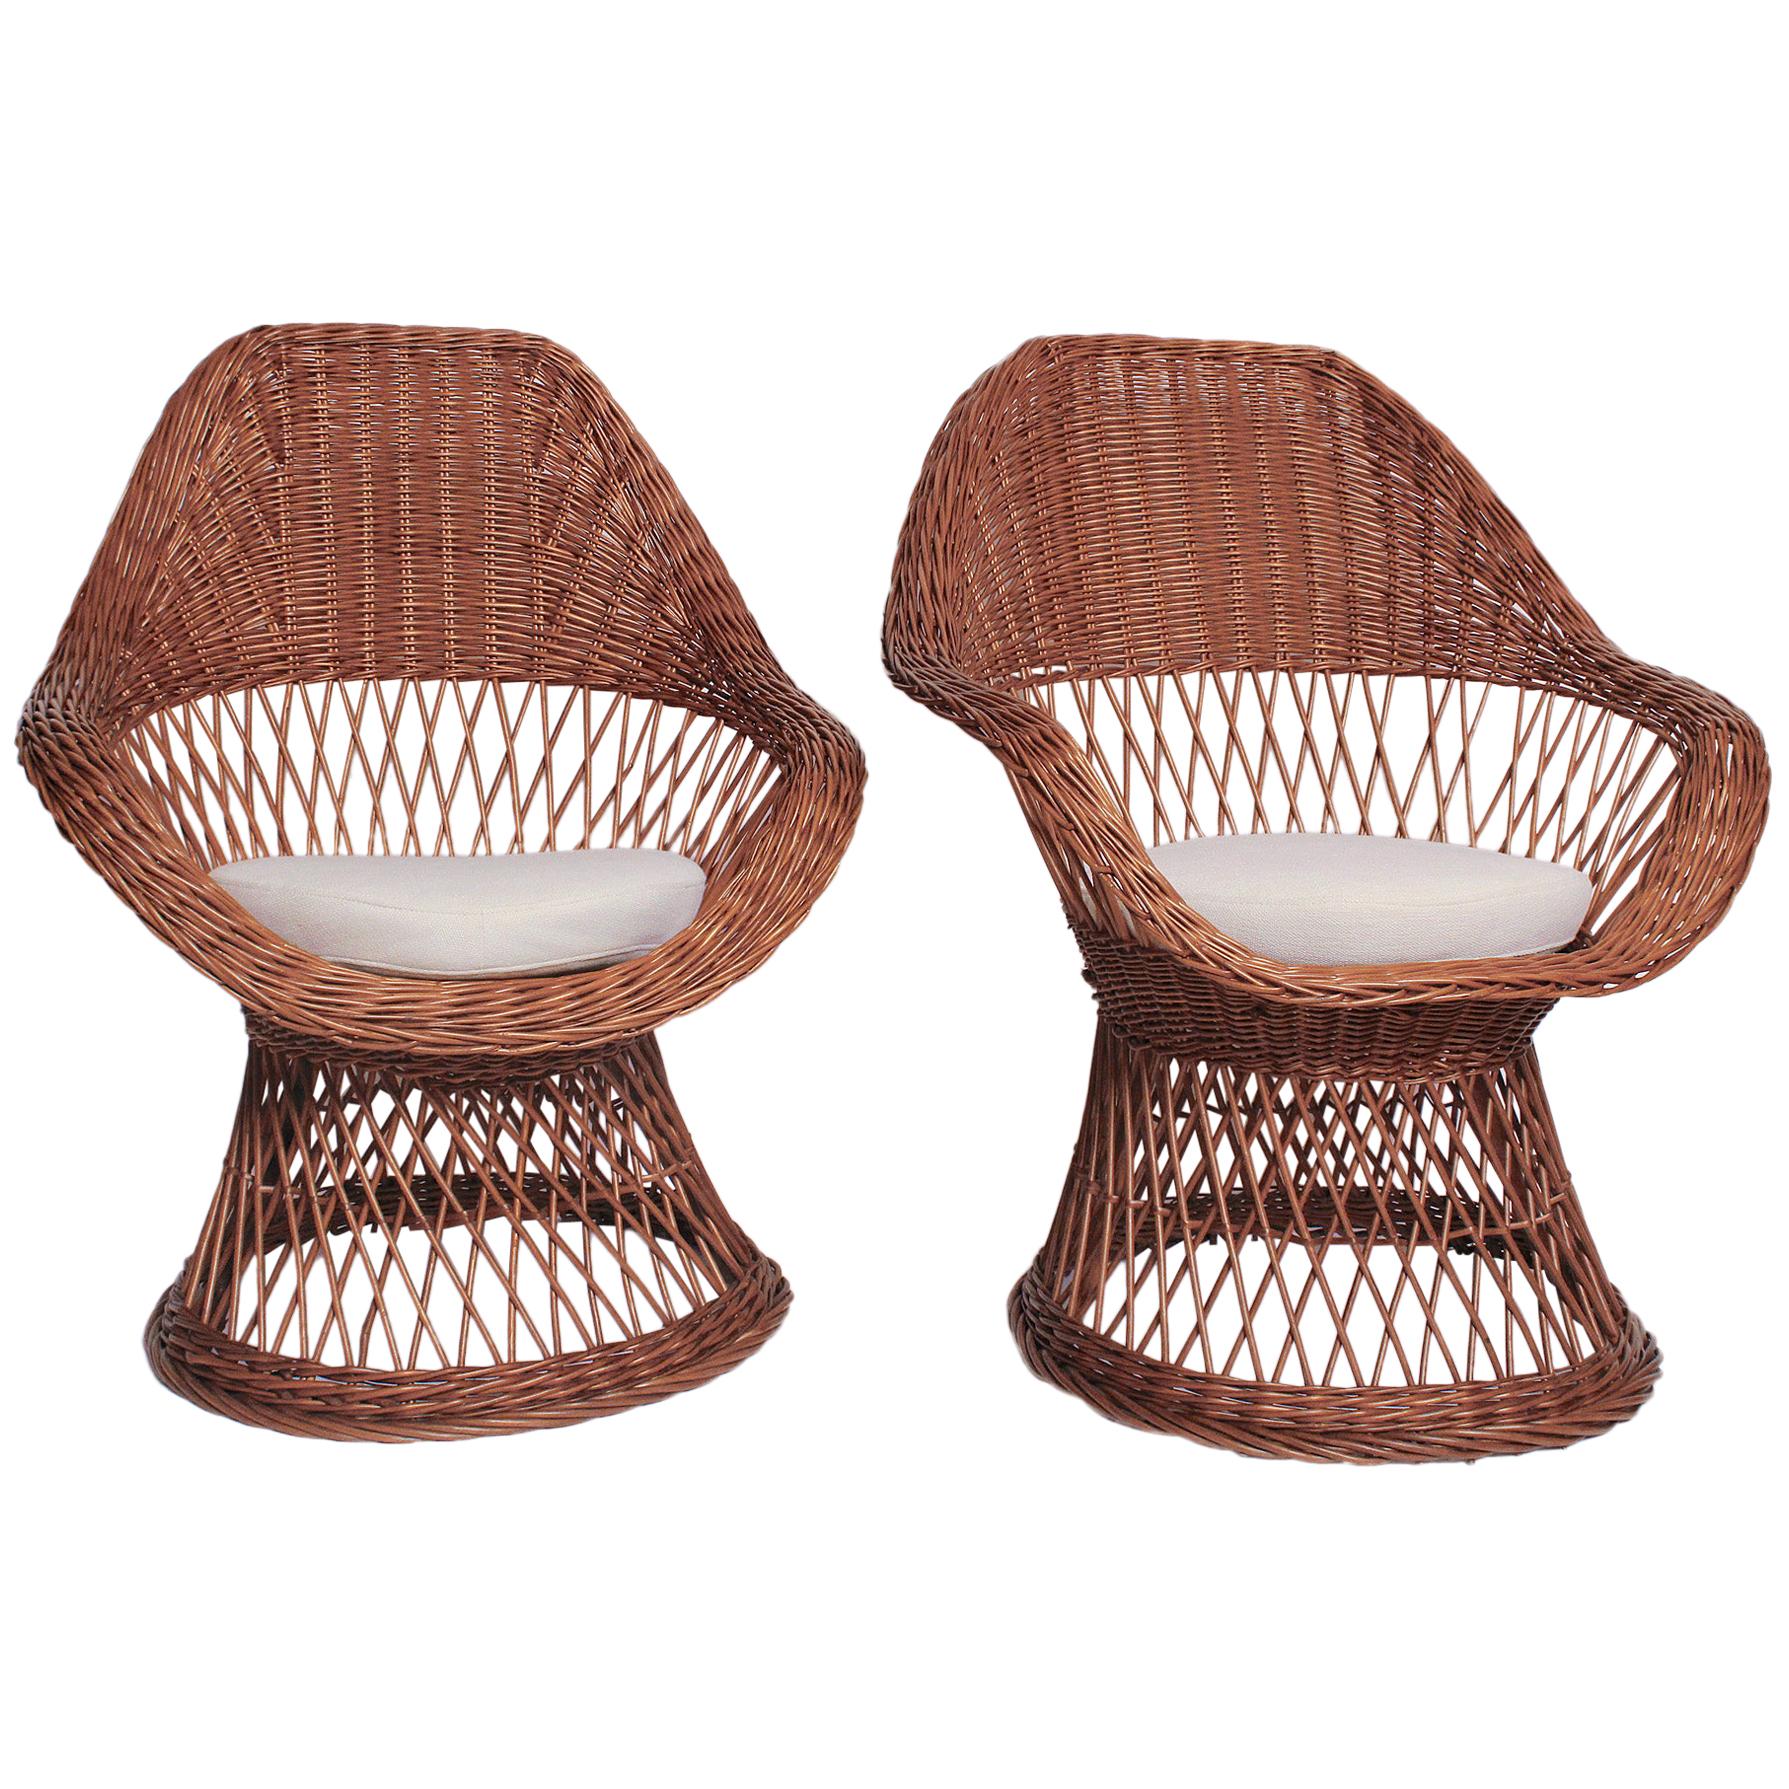 Pair of French Midcentury Wicker Lounge Chairs